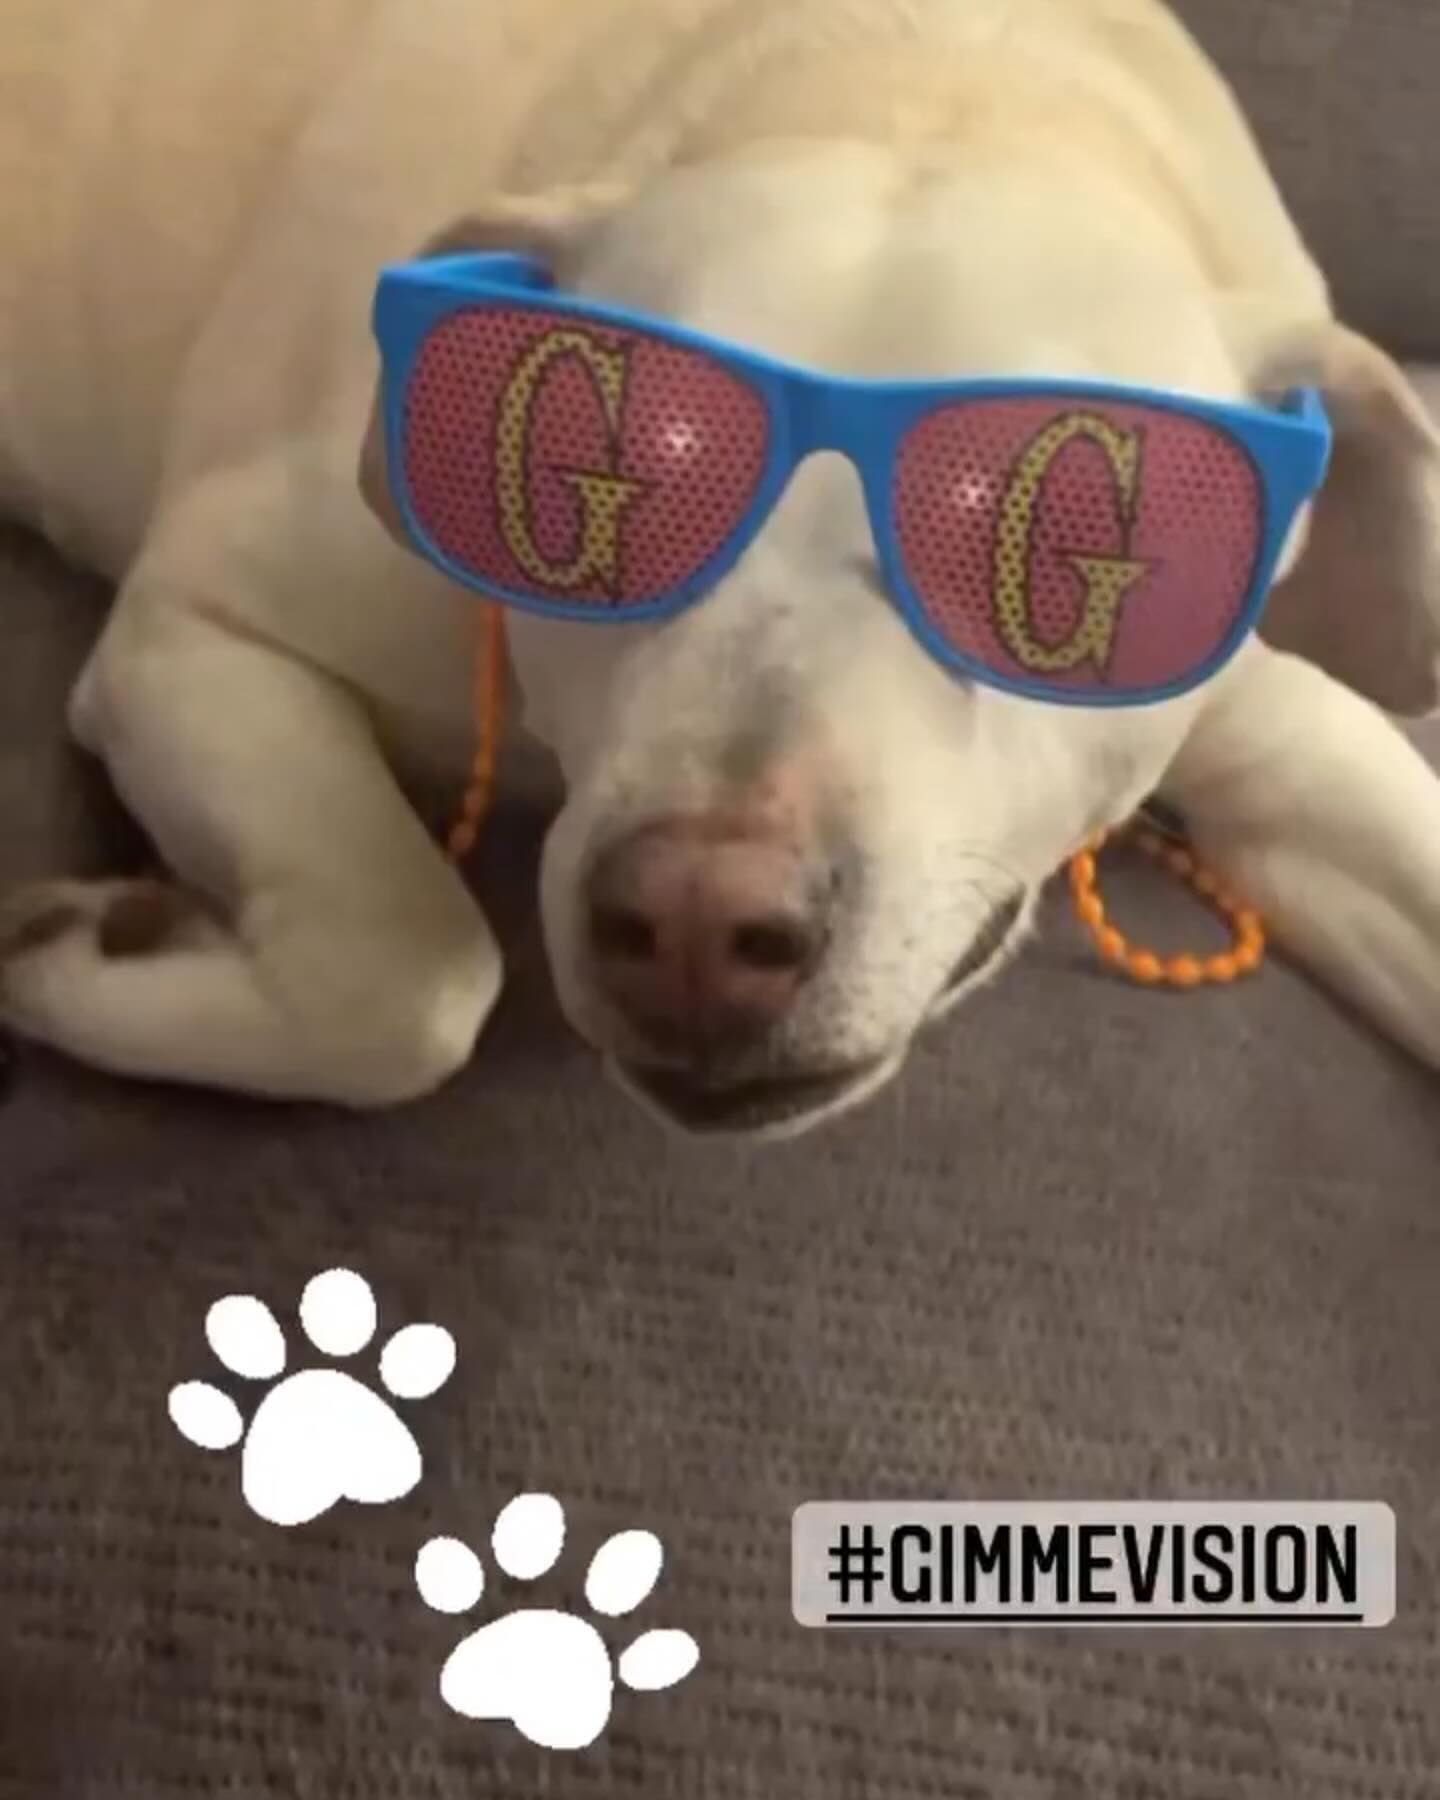 #gimmevision throwback